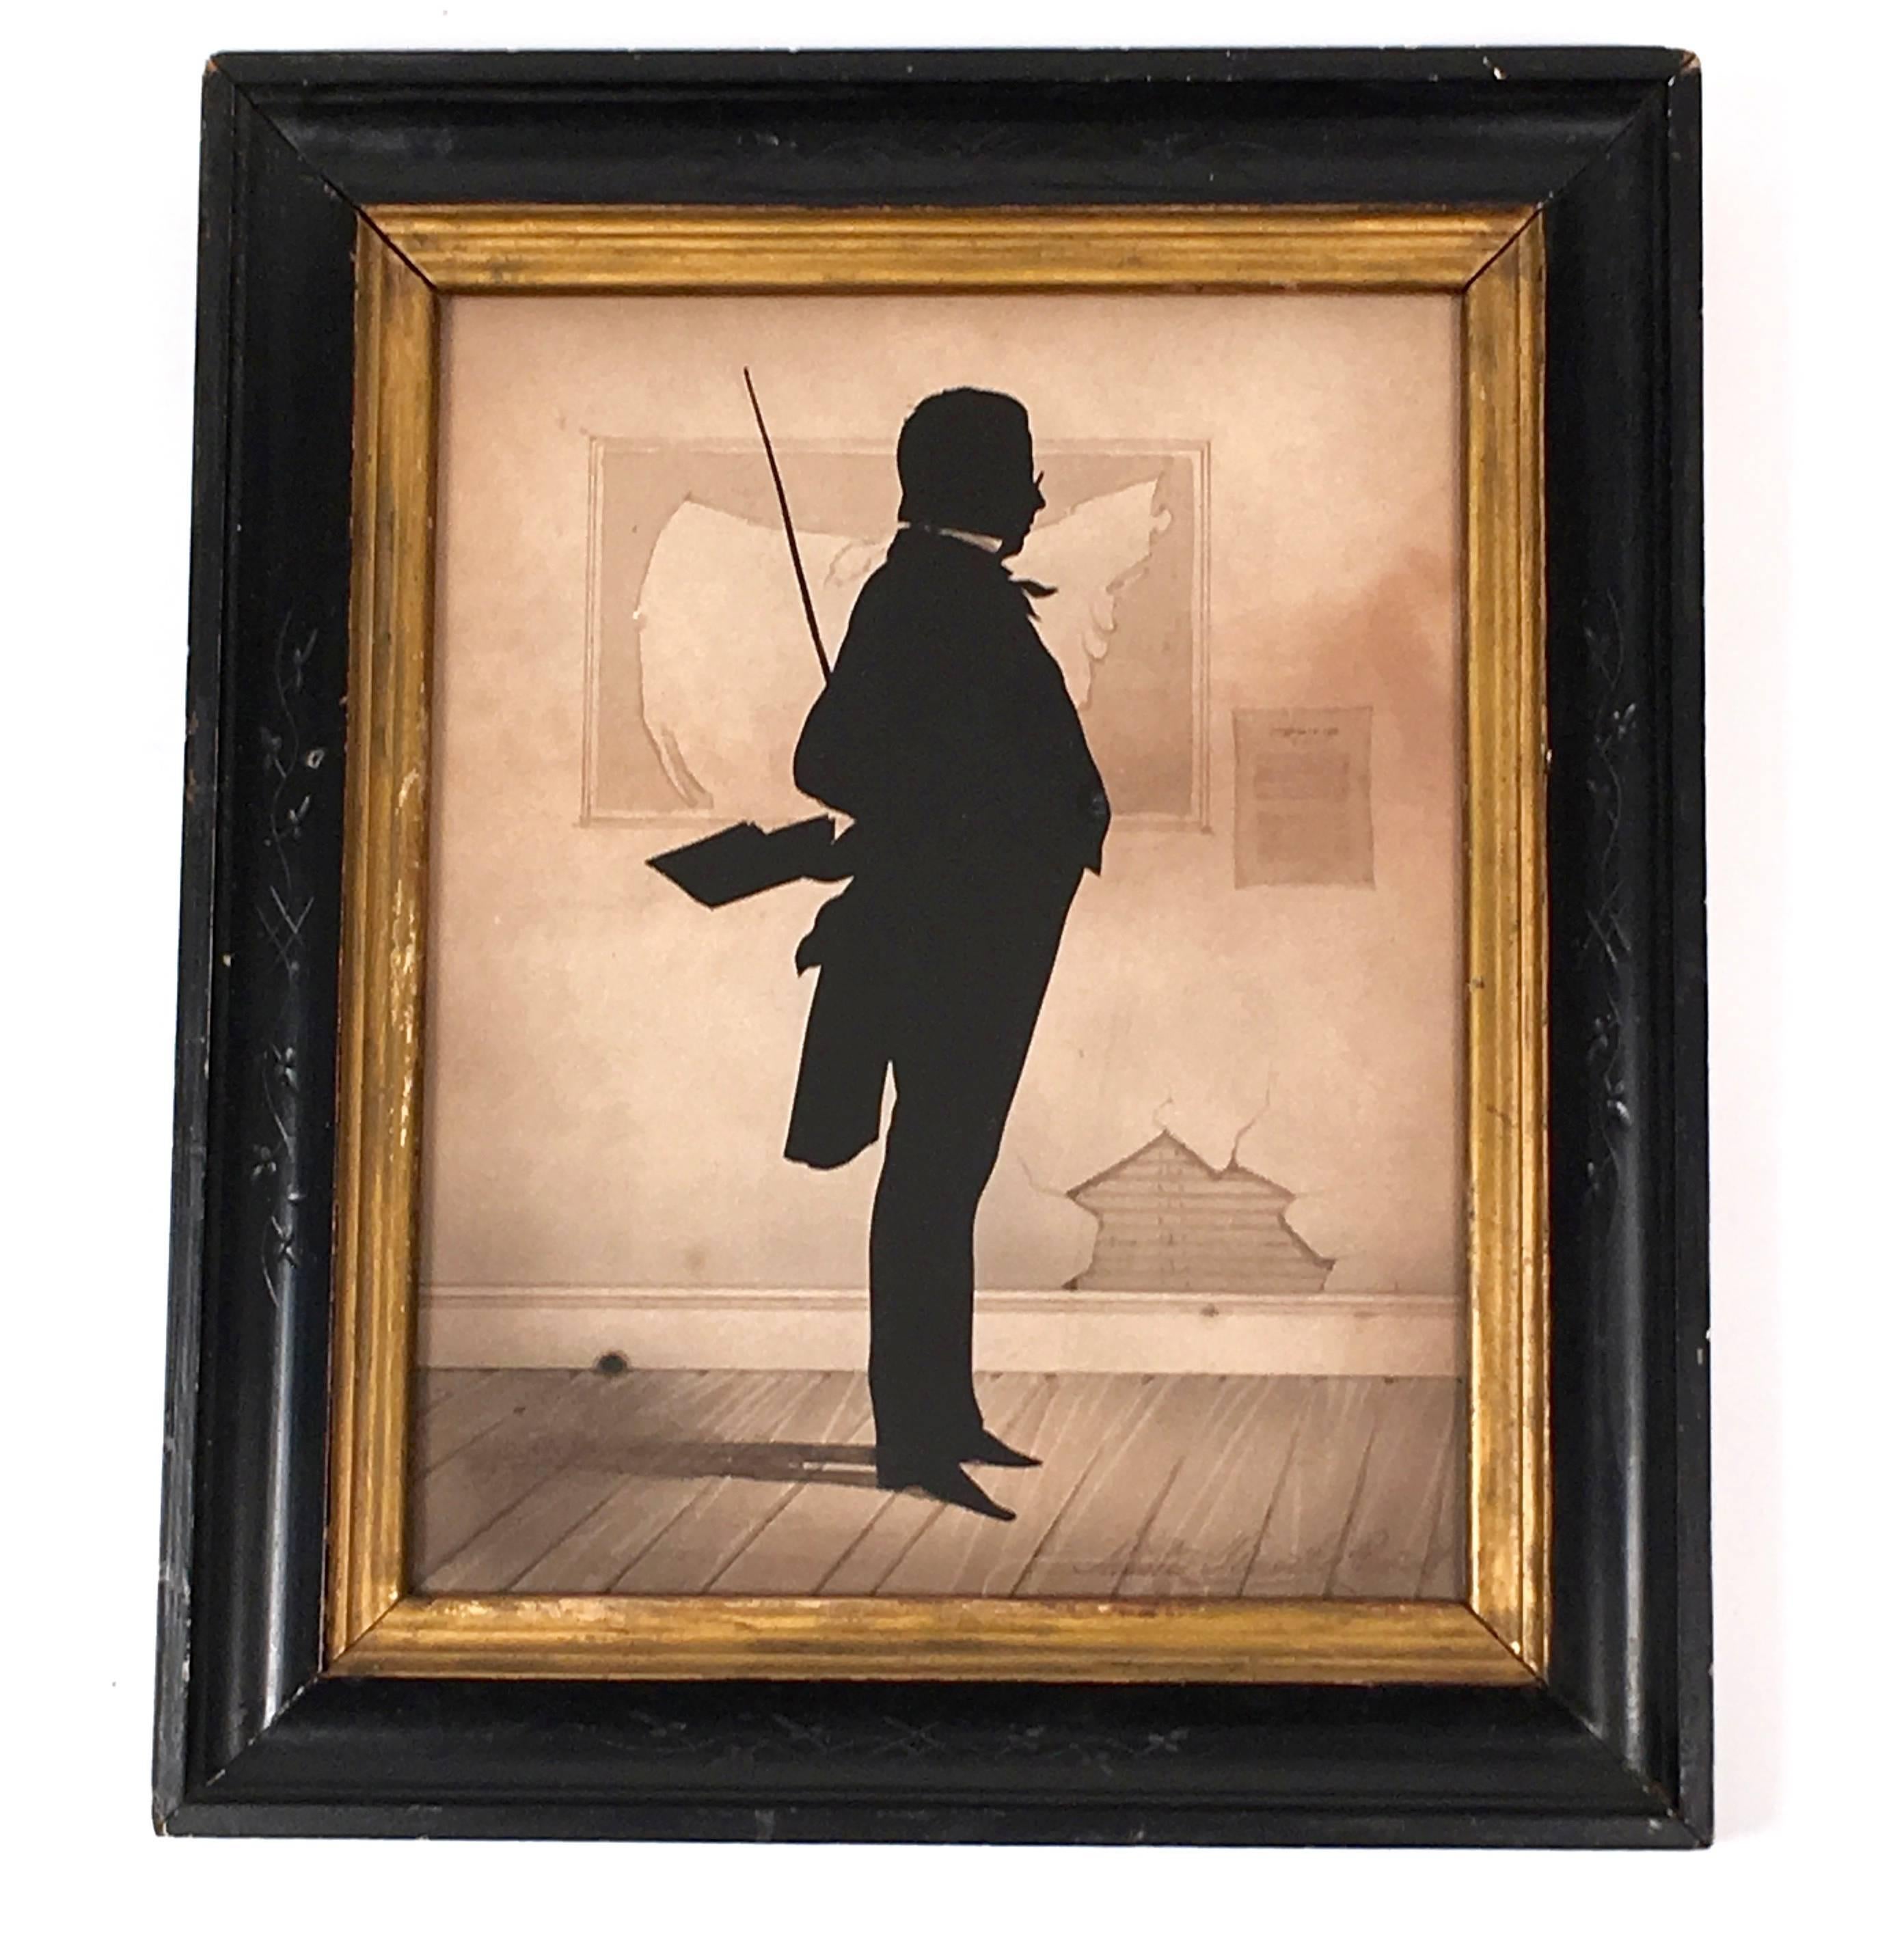 Unusual 19th Century Silhouette of an Ominous School Master or Teacher